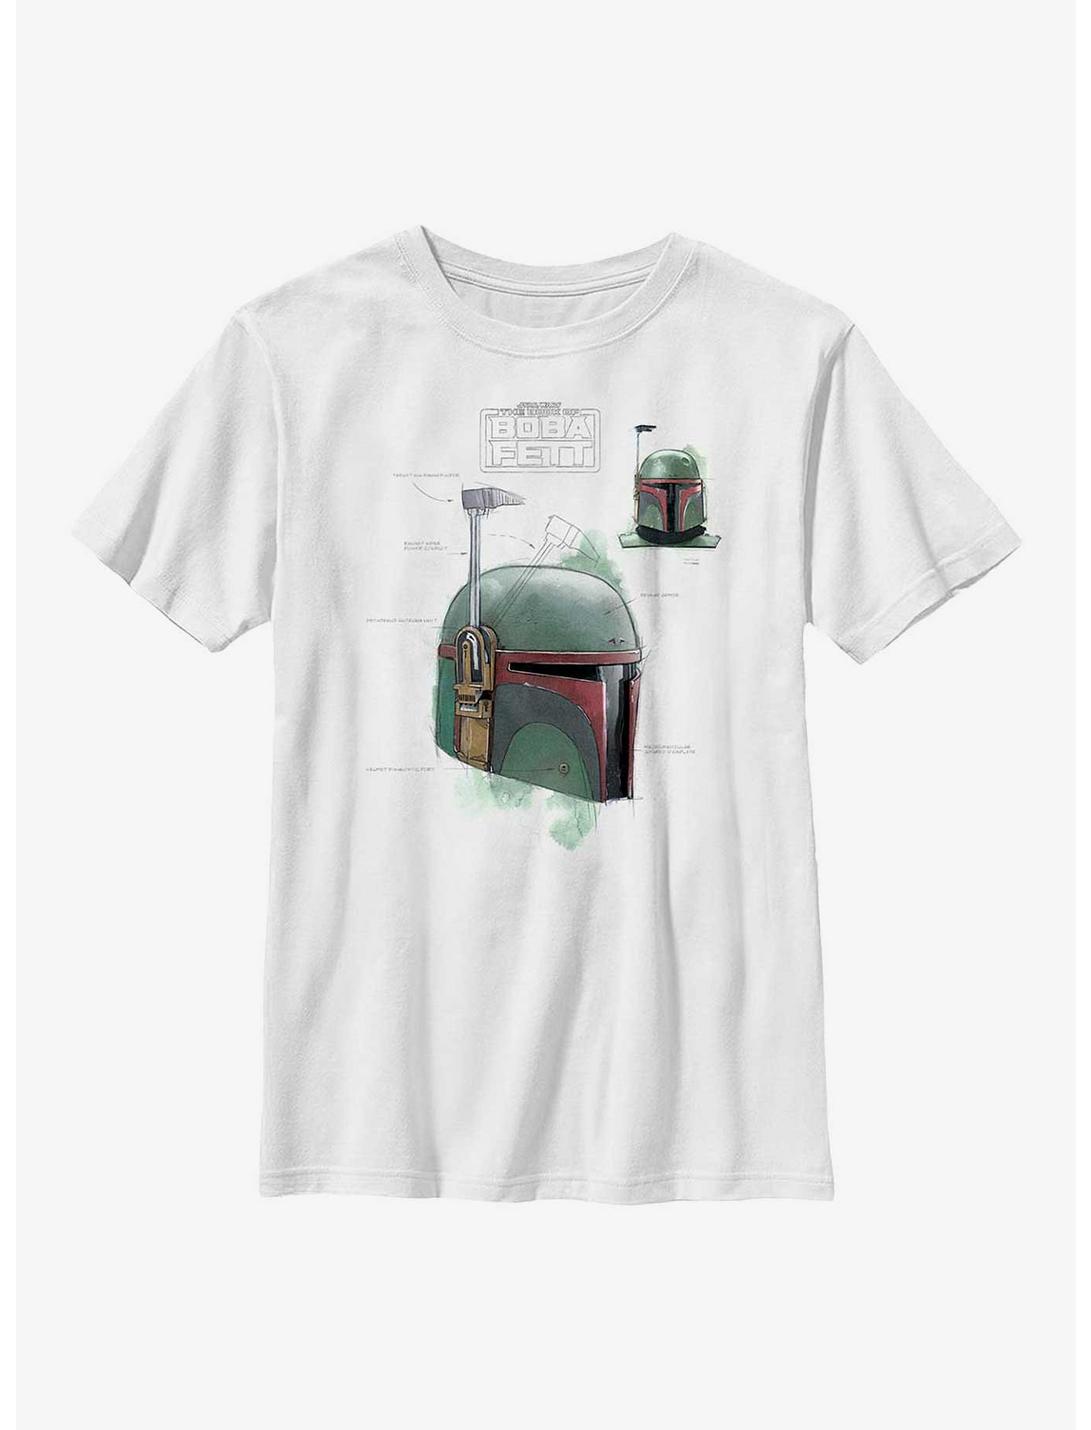 Star Wars: The Book Of Boba Fett Helmet Schematic Painted Youth T-Shirt, WHITE, hi-res